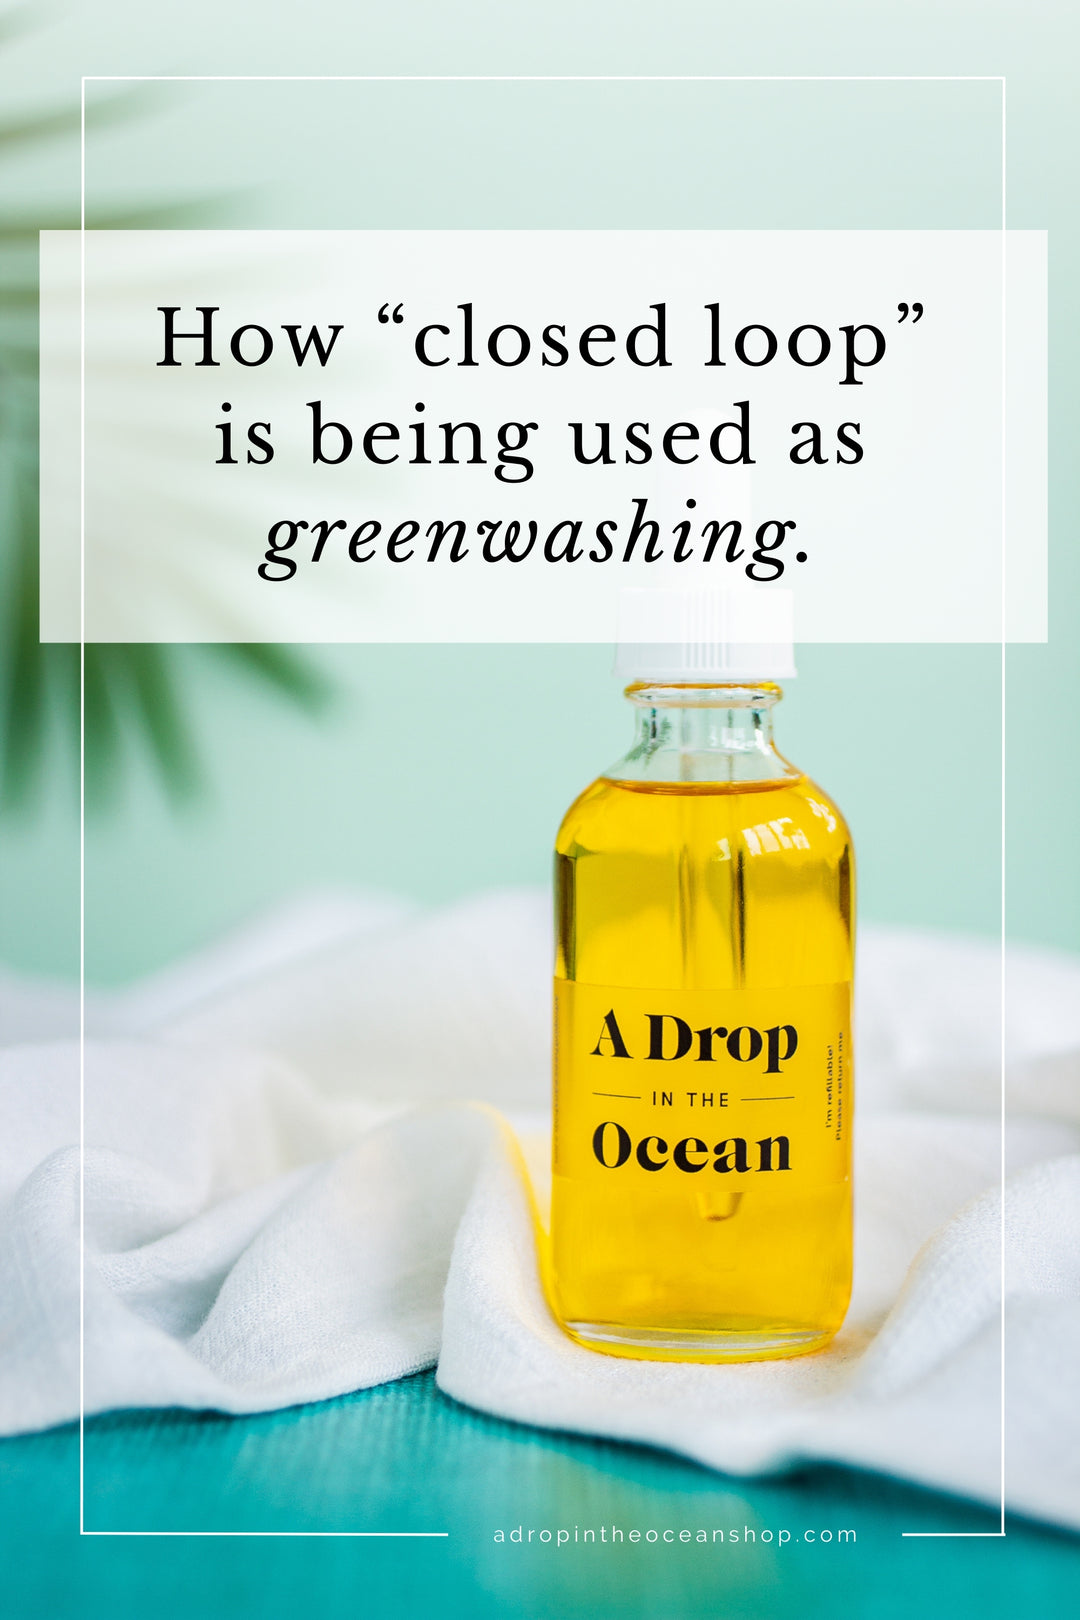 A Drop in the Ocean Blog: How "closed loop" is becoming greenwashing